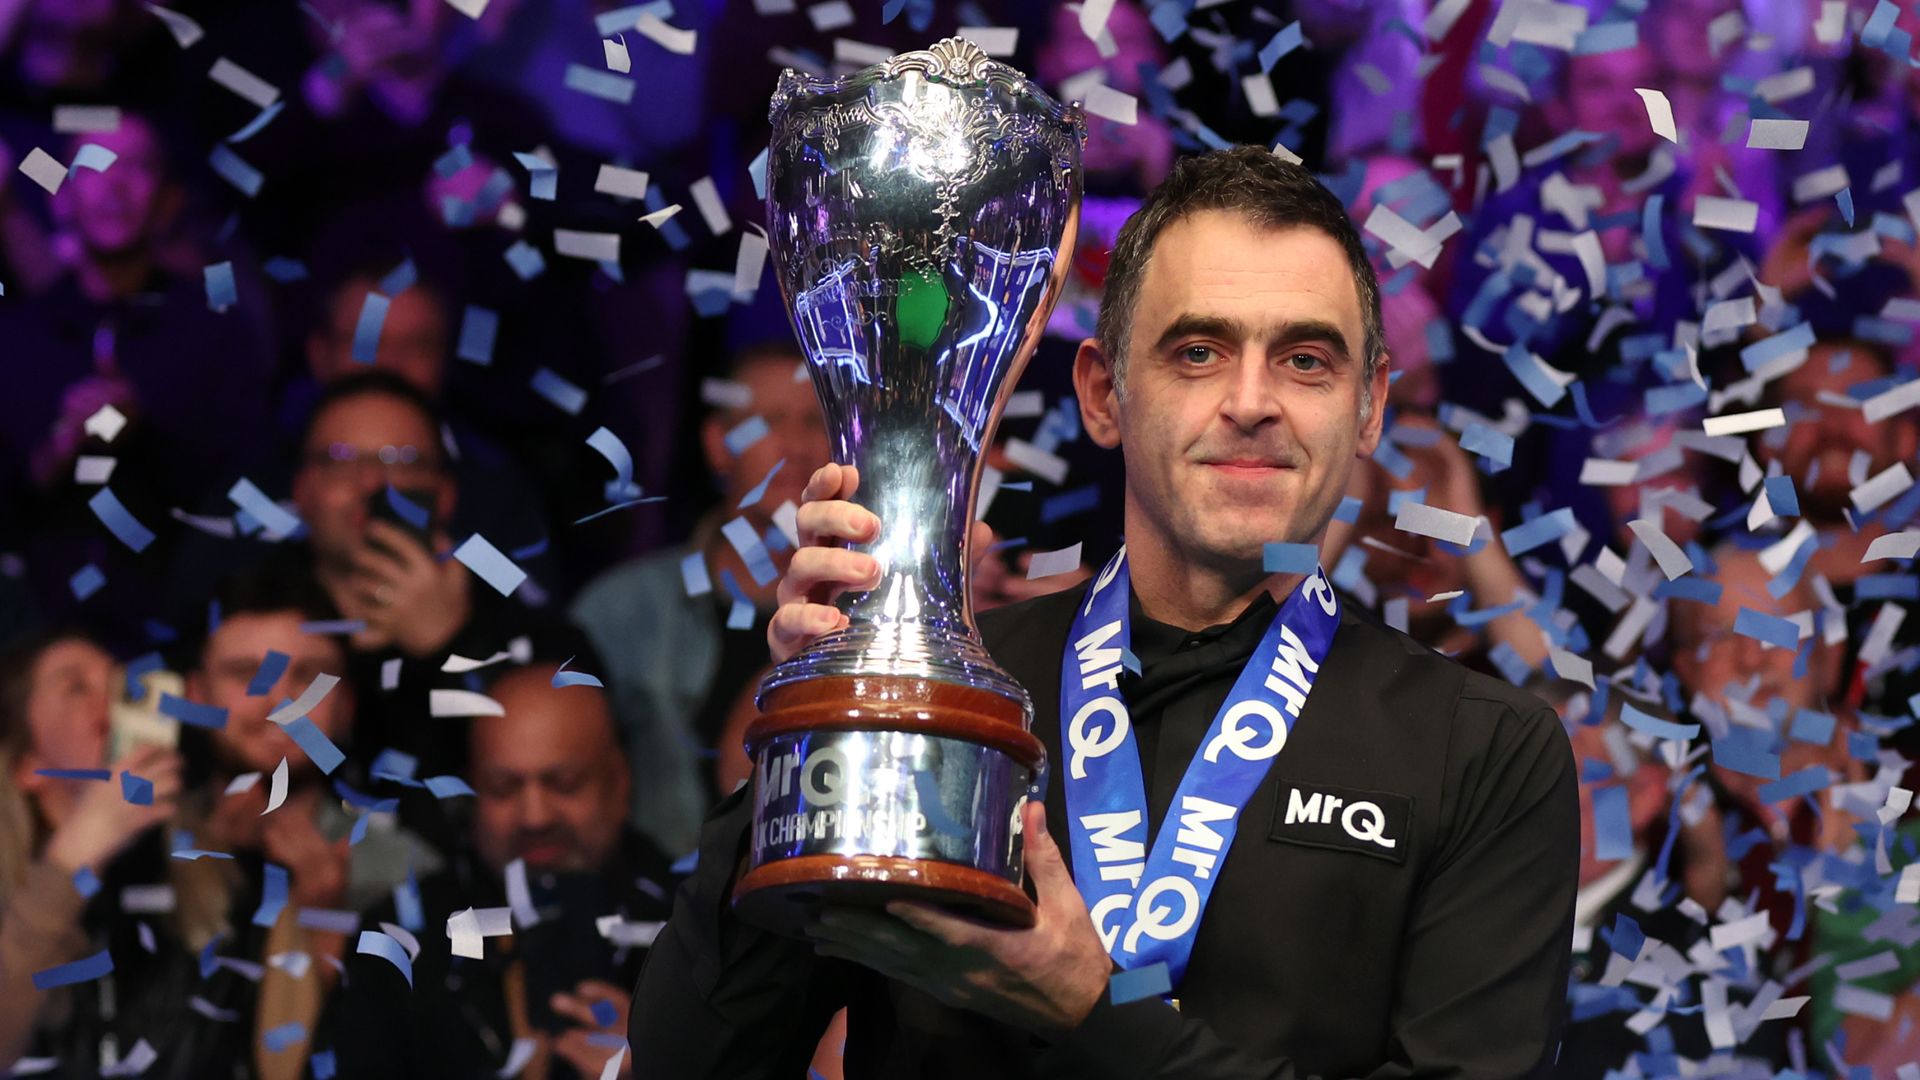 O'Sullivan beats Ding to clinch record eighth UK Championship title